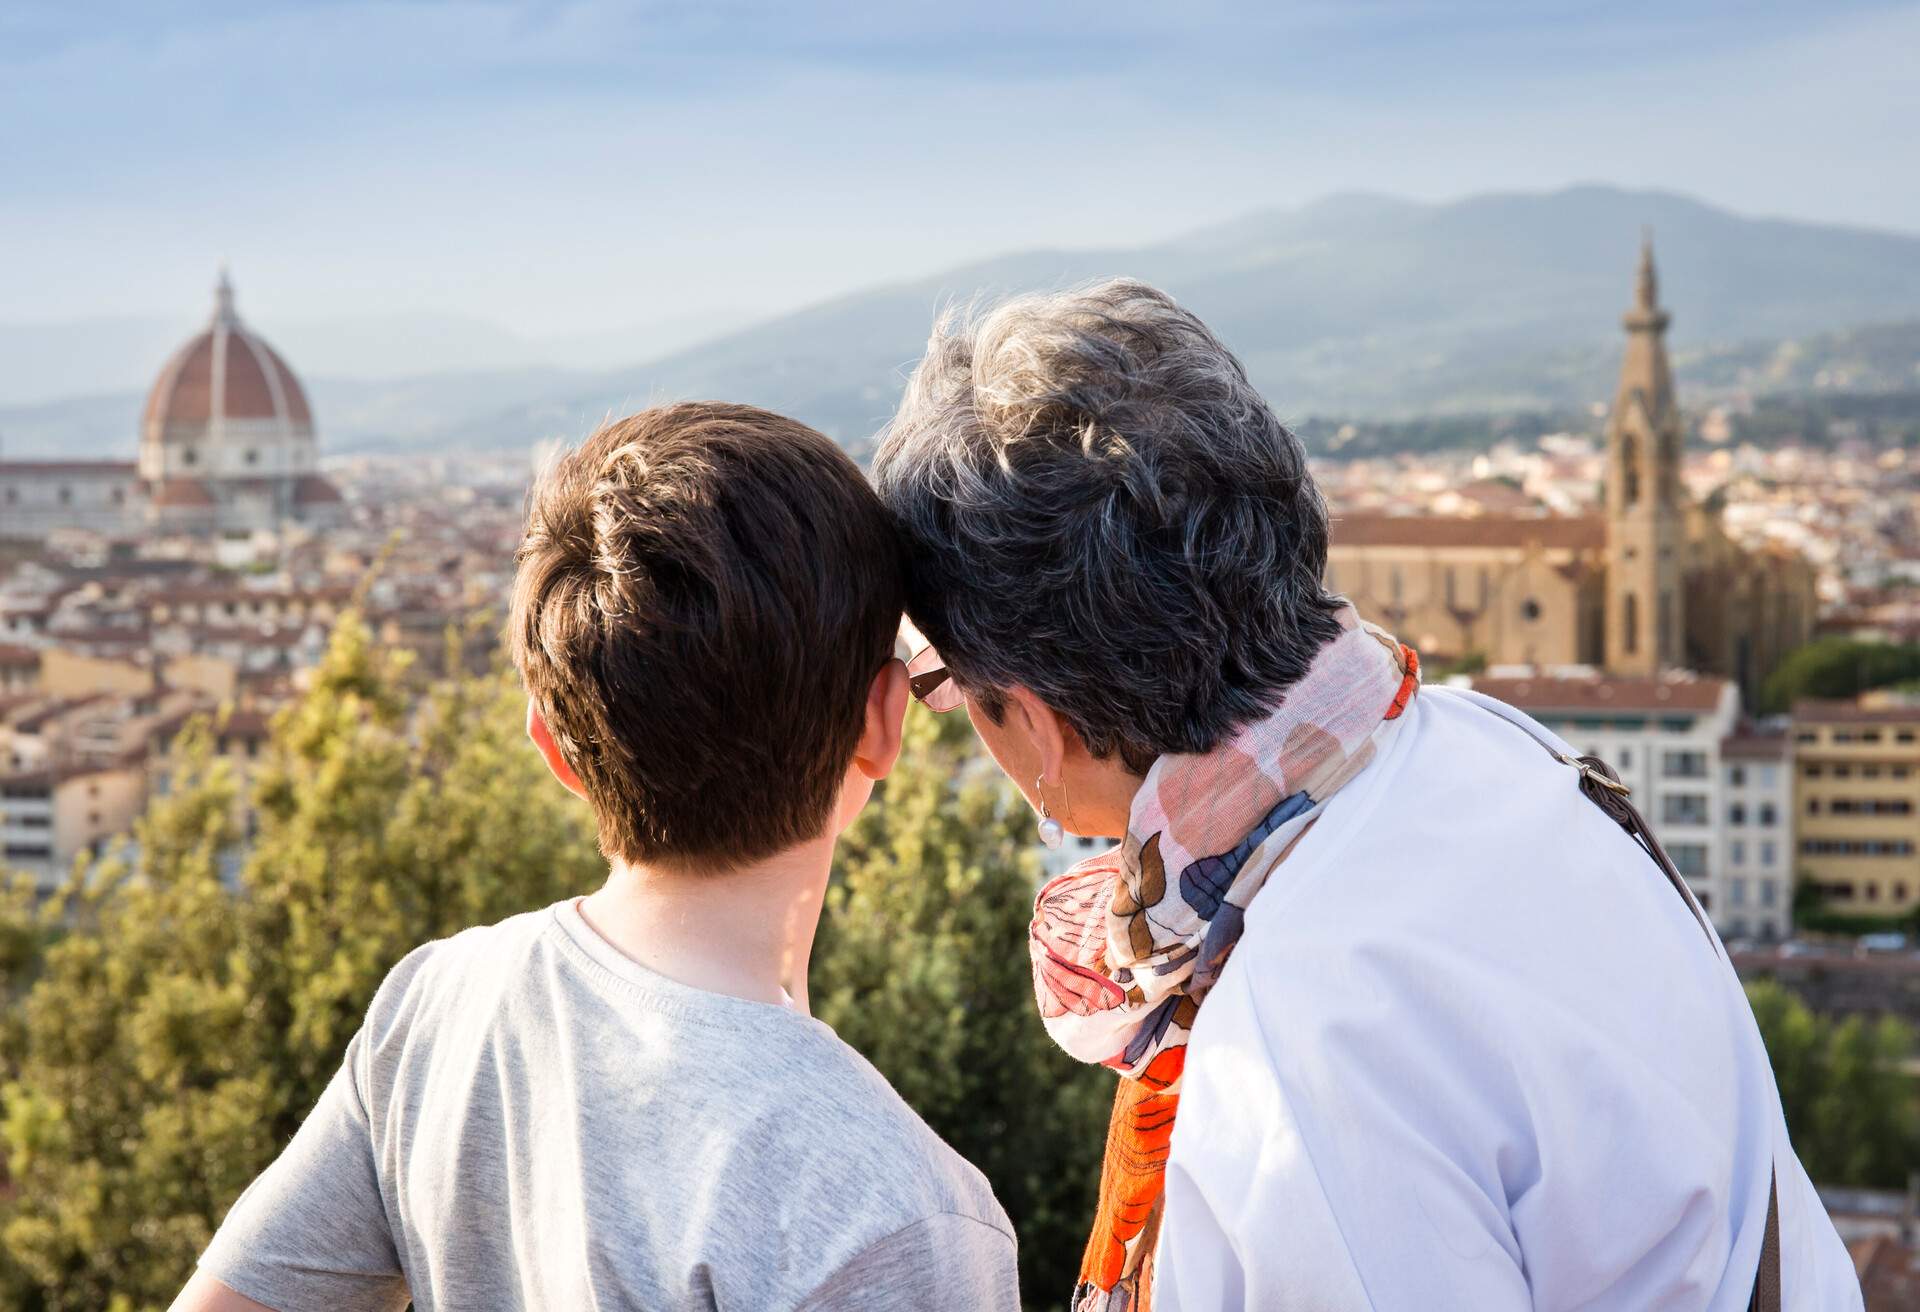 DEST_ITALY_TUSCANY_FLORENCE_THEME_KIDS_FAMILY_GettyImages-650159997